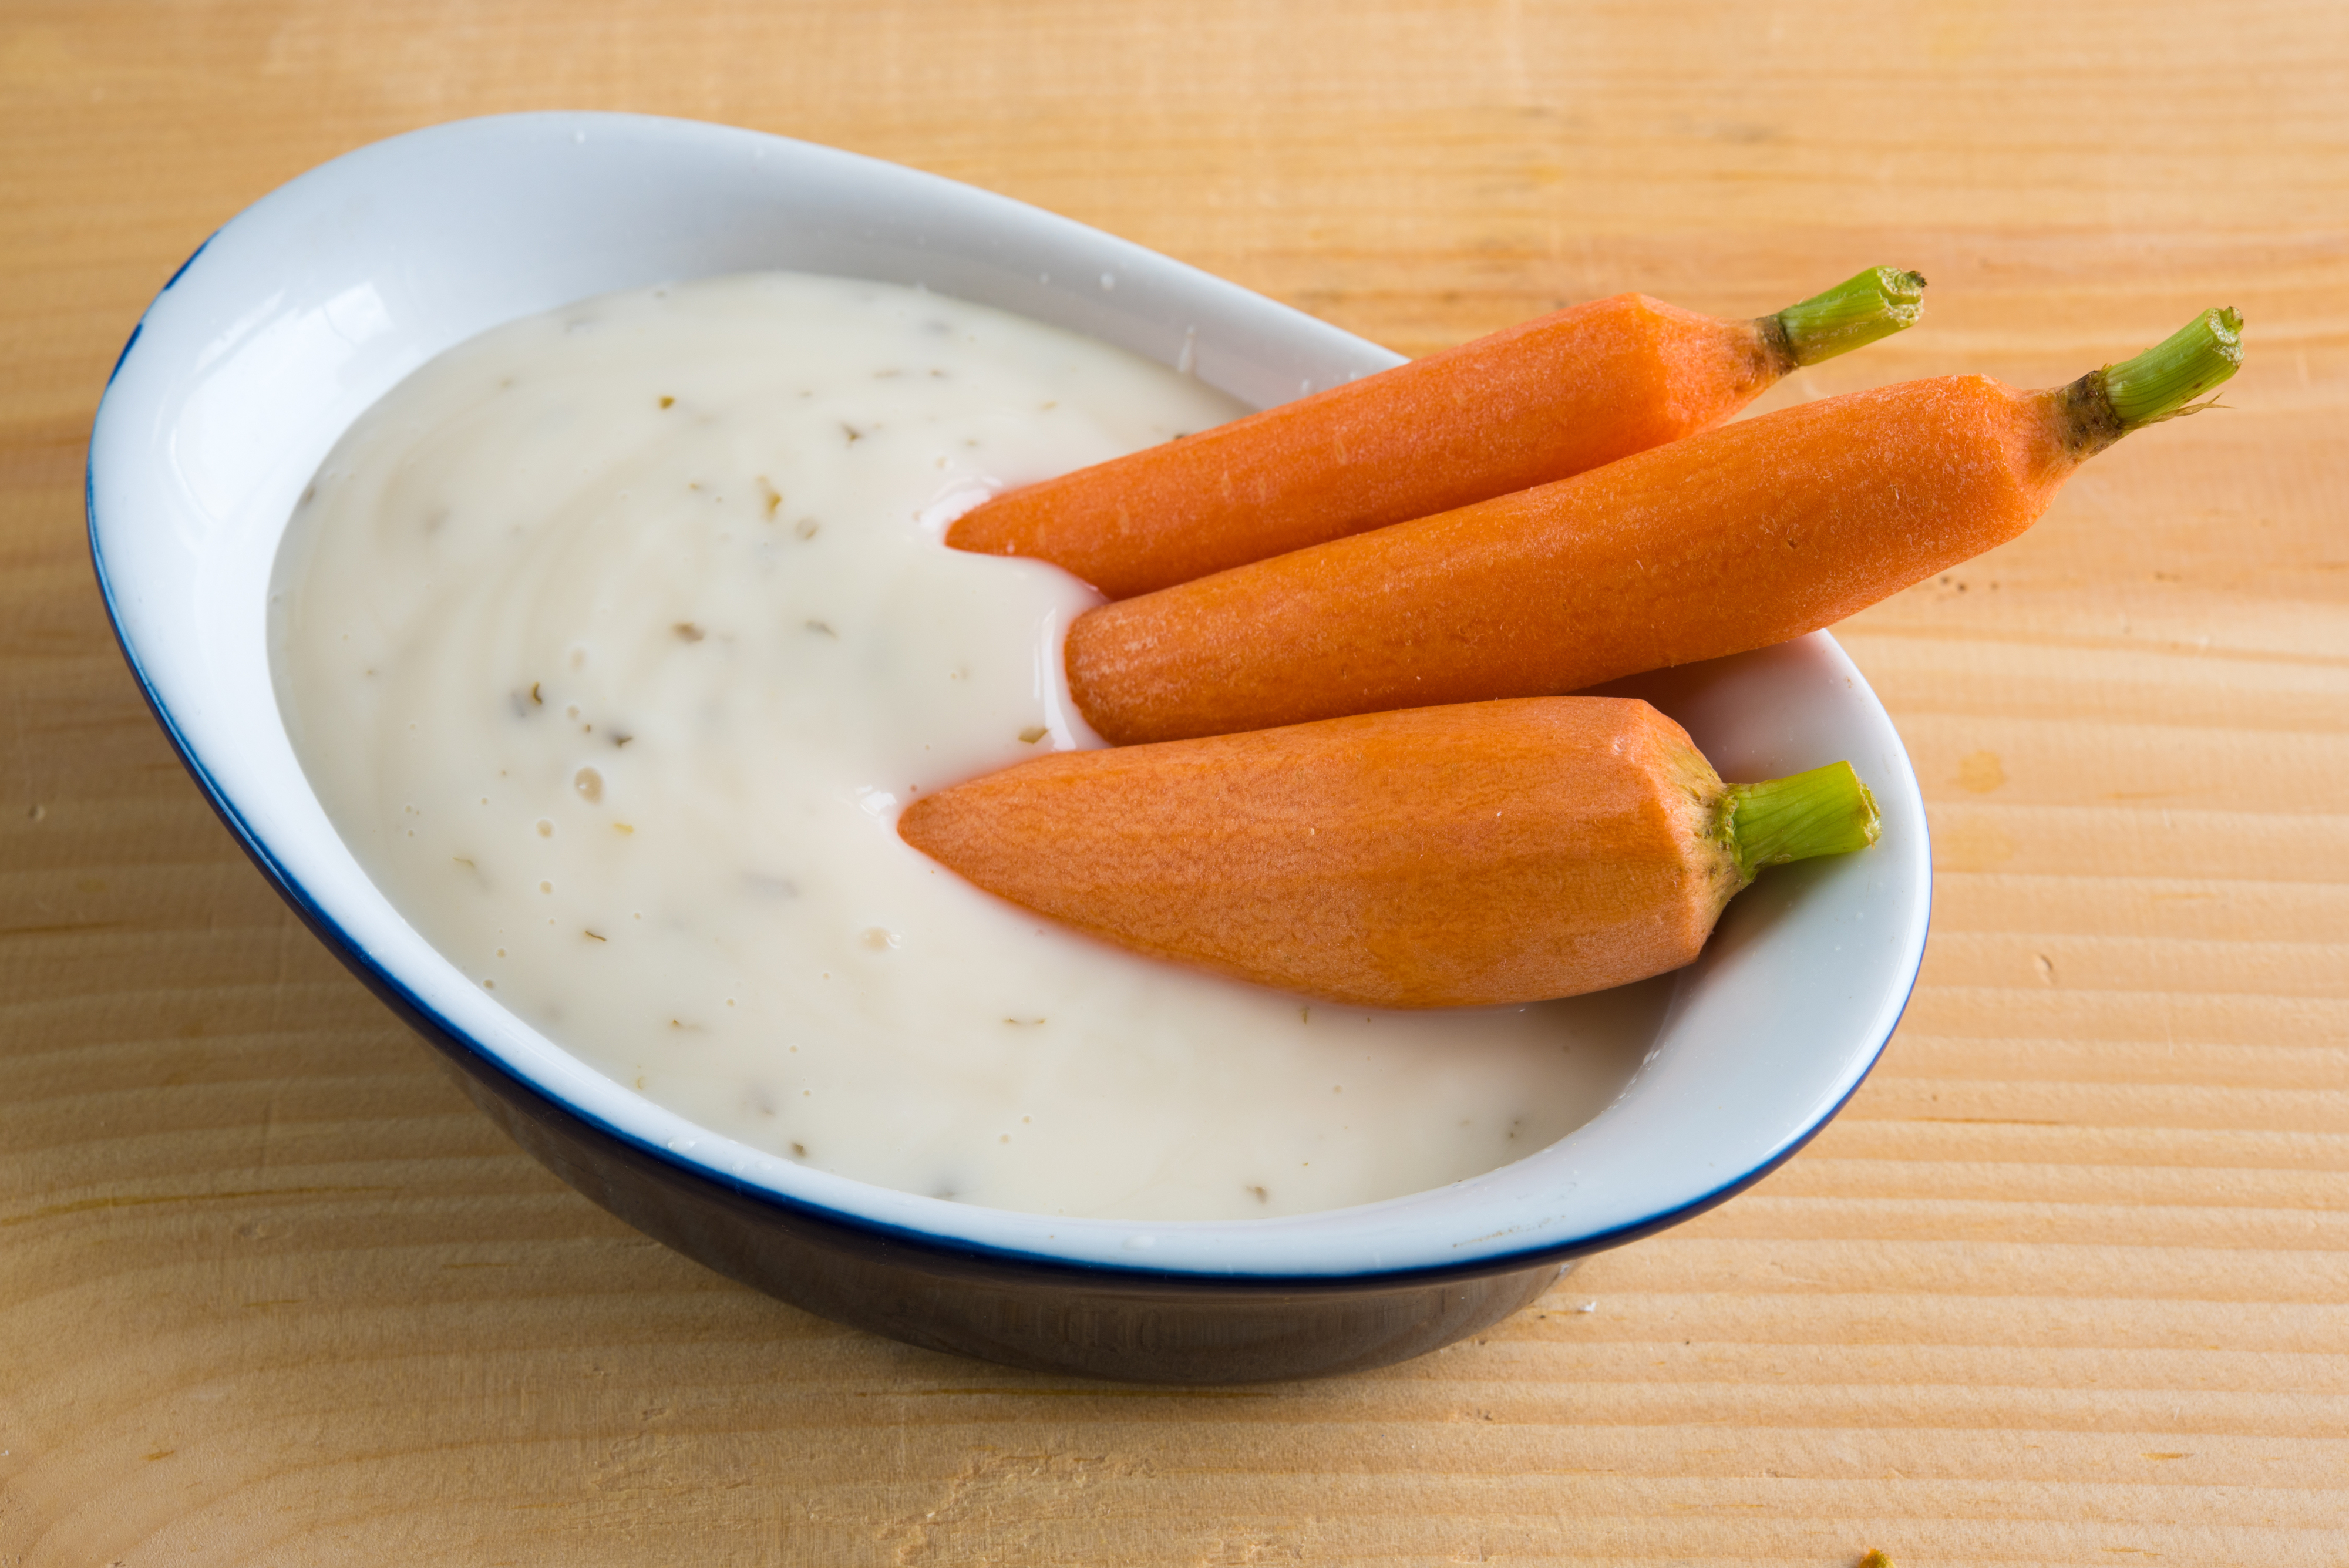 Three whole carrots in a bowl of dip on a wooden surface